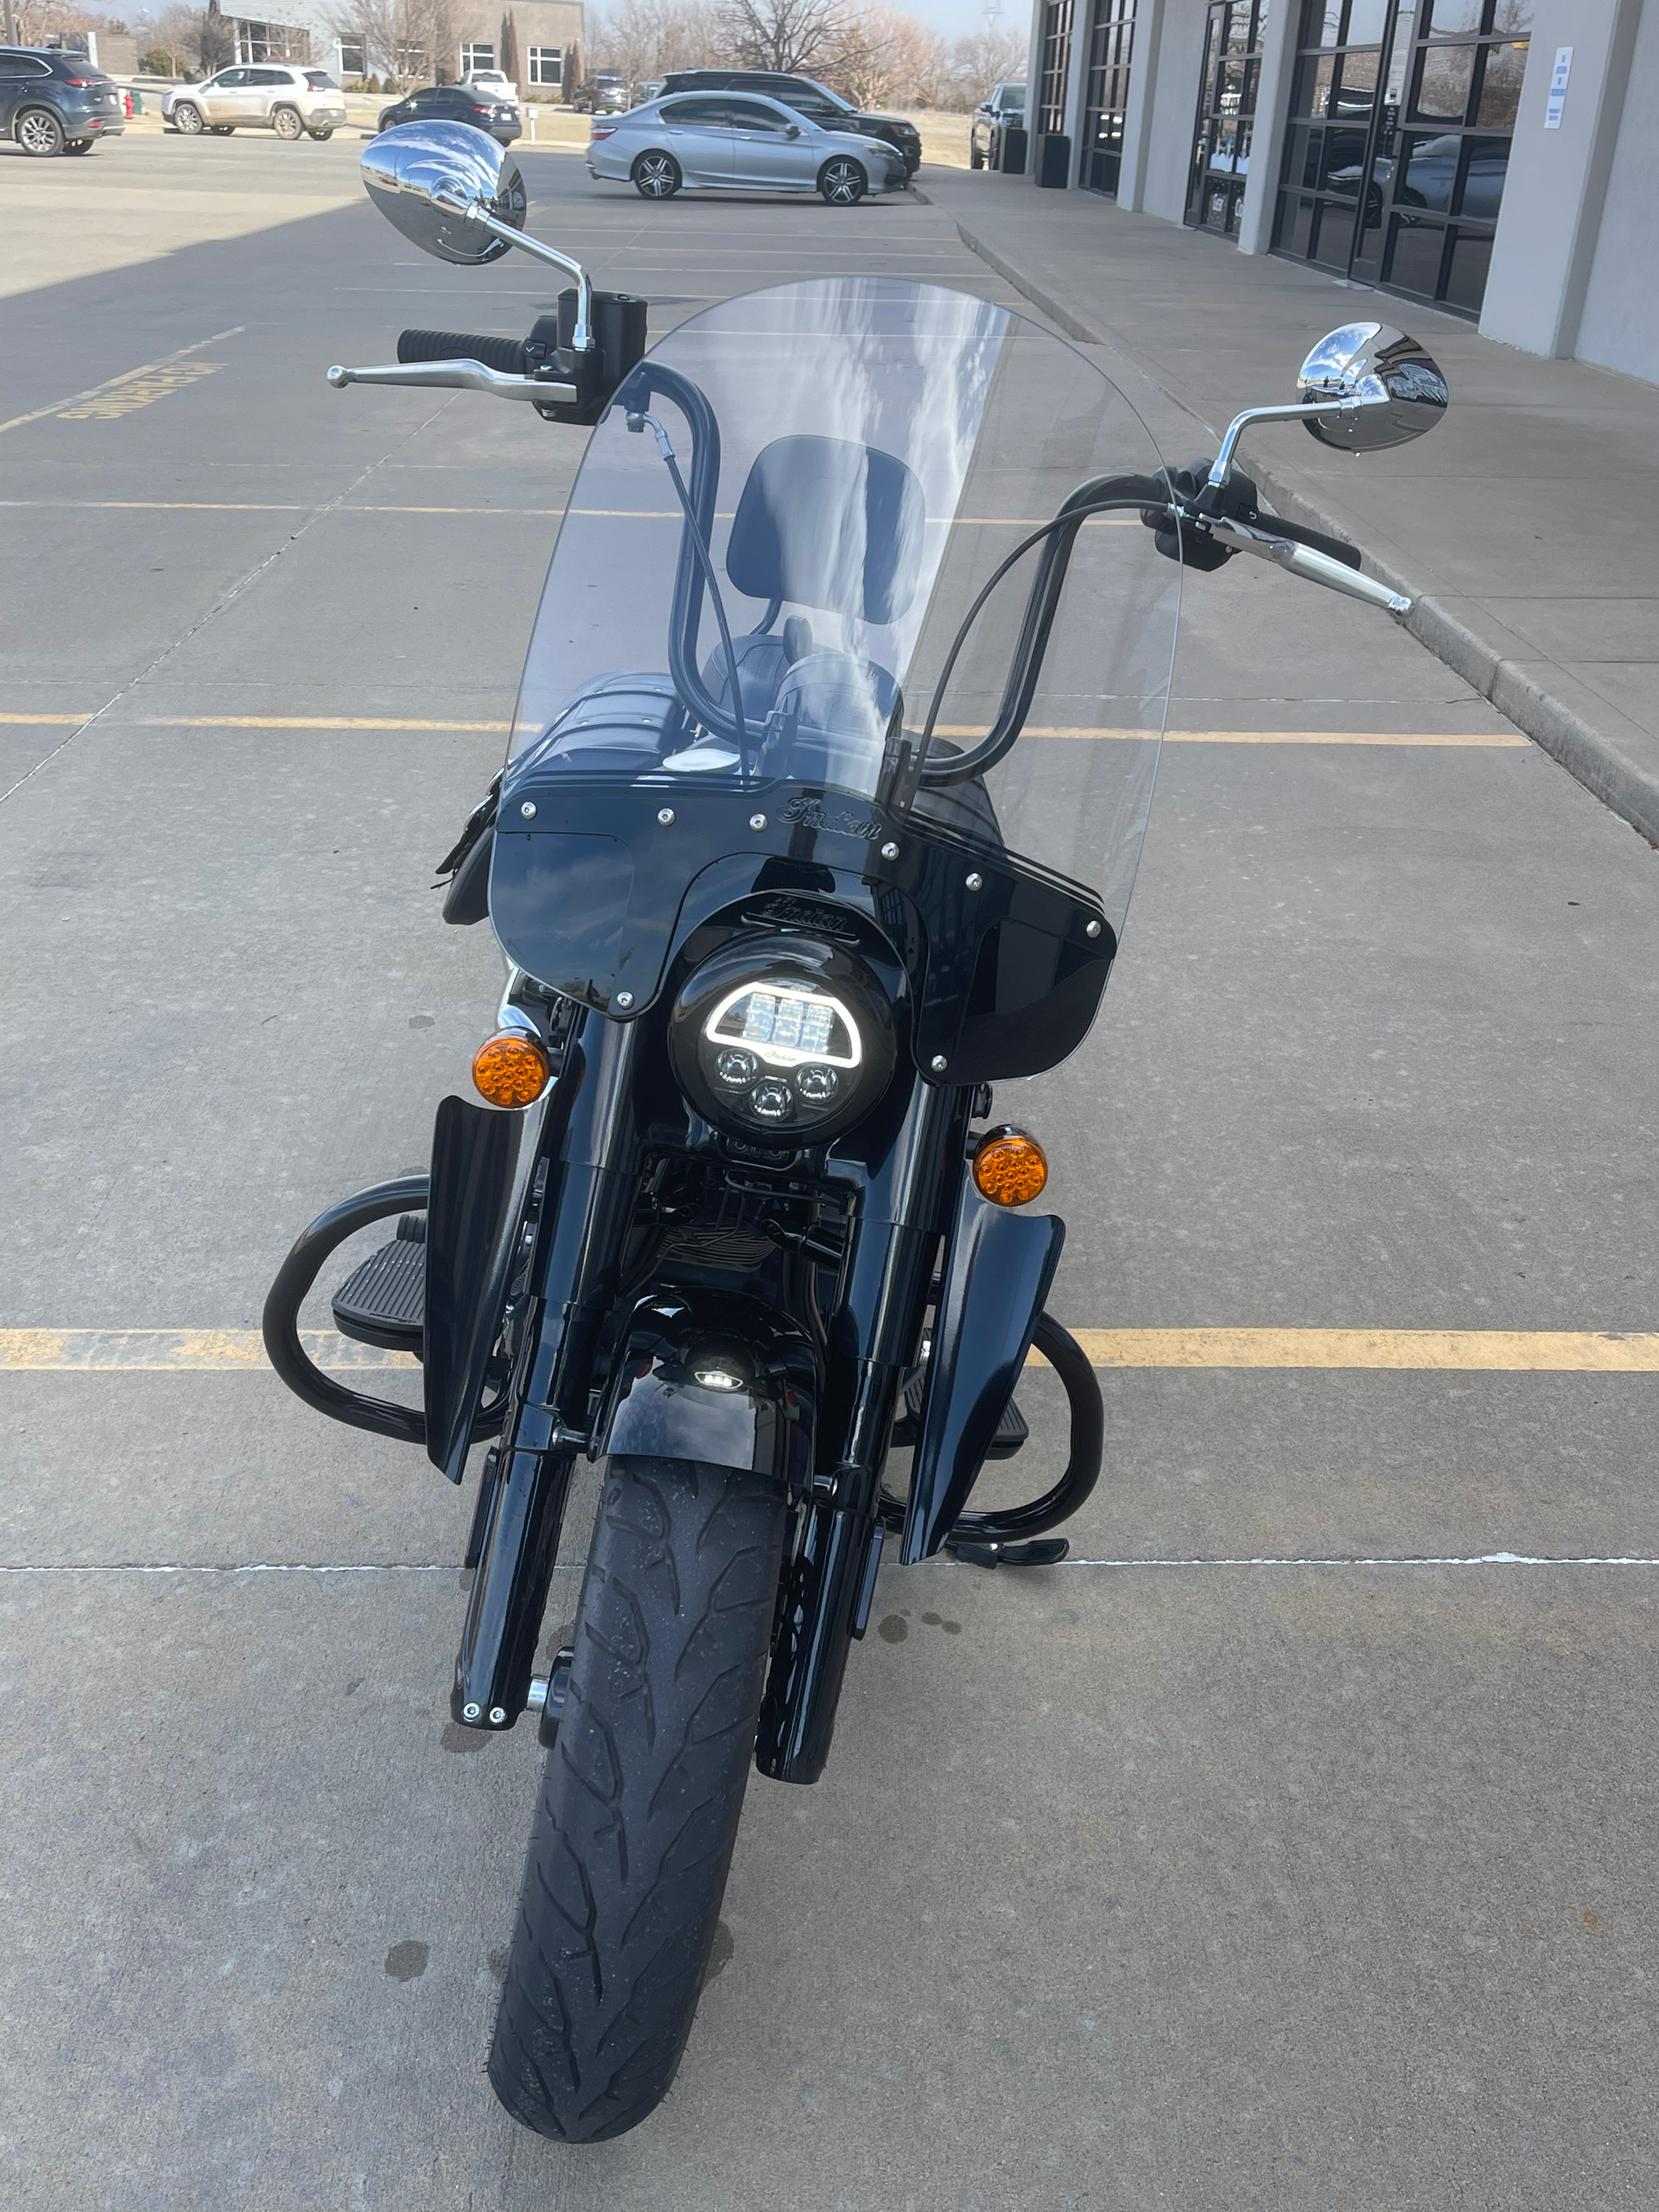 2022 Indian Motorcycle Super Chief in Norman, Oklahoma - Photo 3